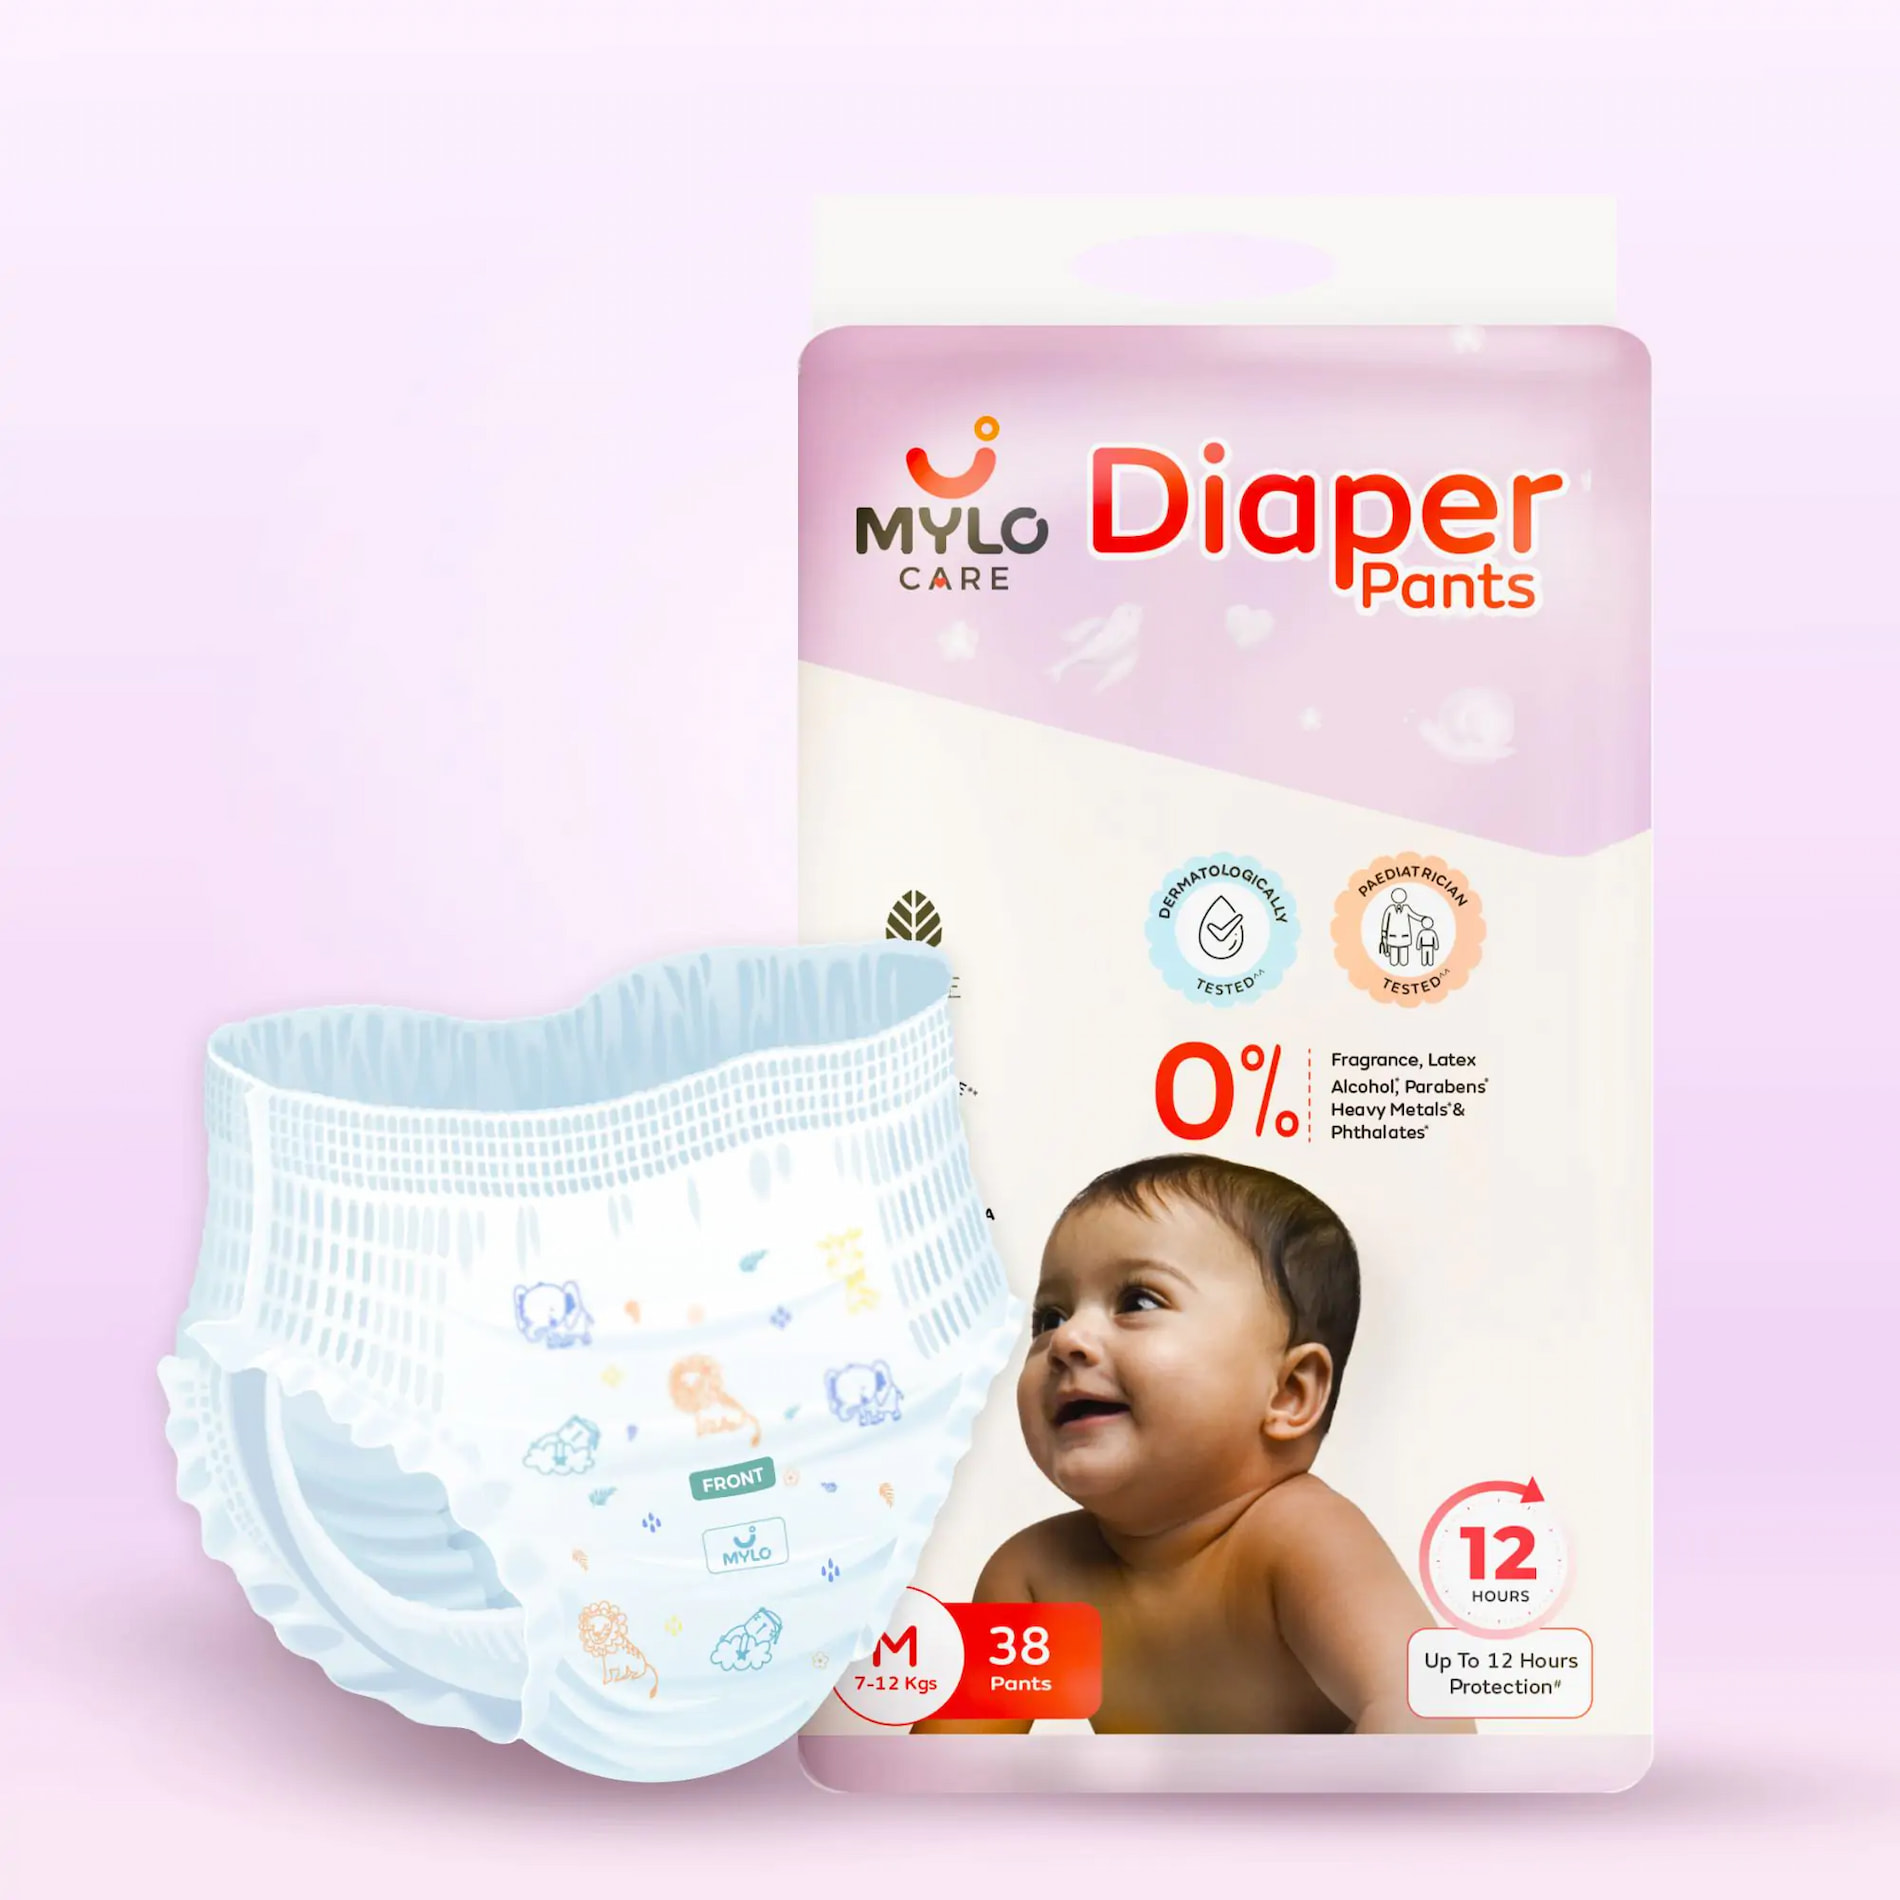 Mylo Care Baby Diaper Pants Medium (M) Size, 7-12 kgs with ADL Technology - 38 Count - 12 Hours Protection 